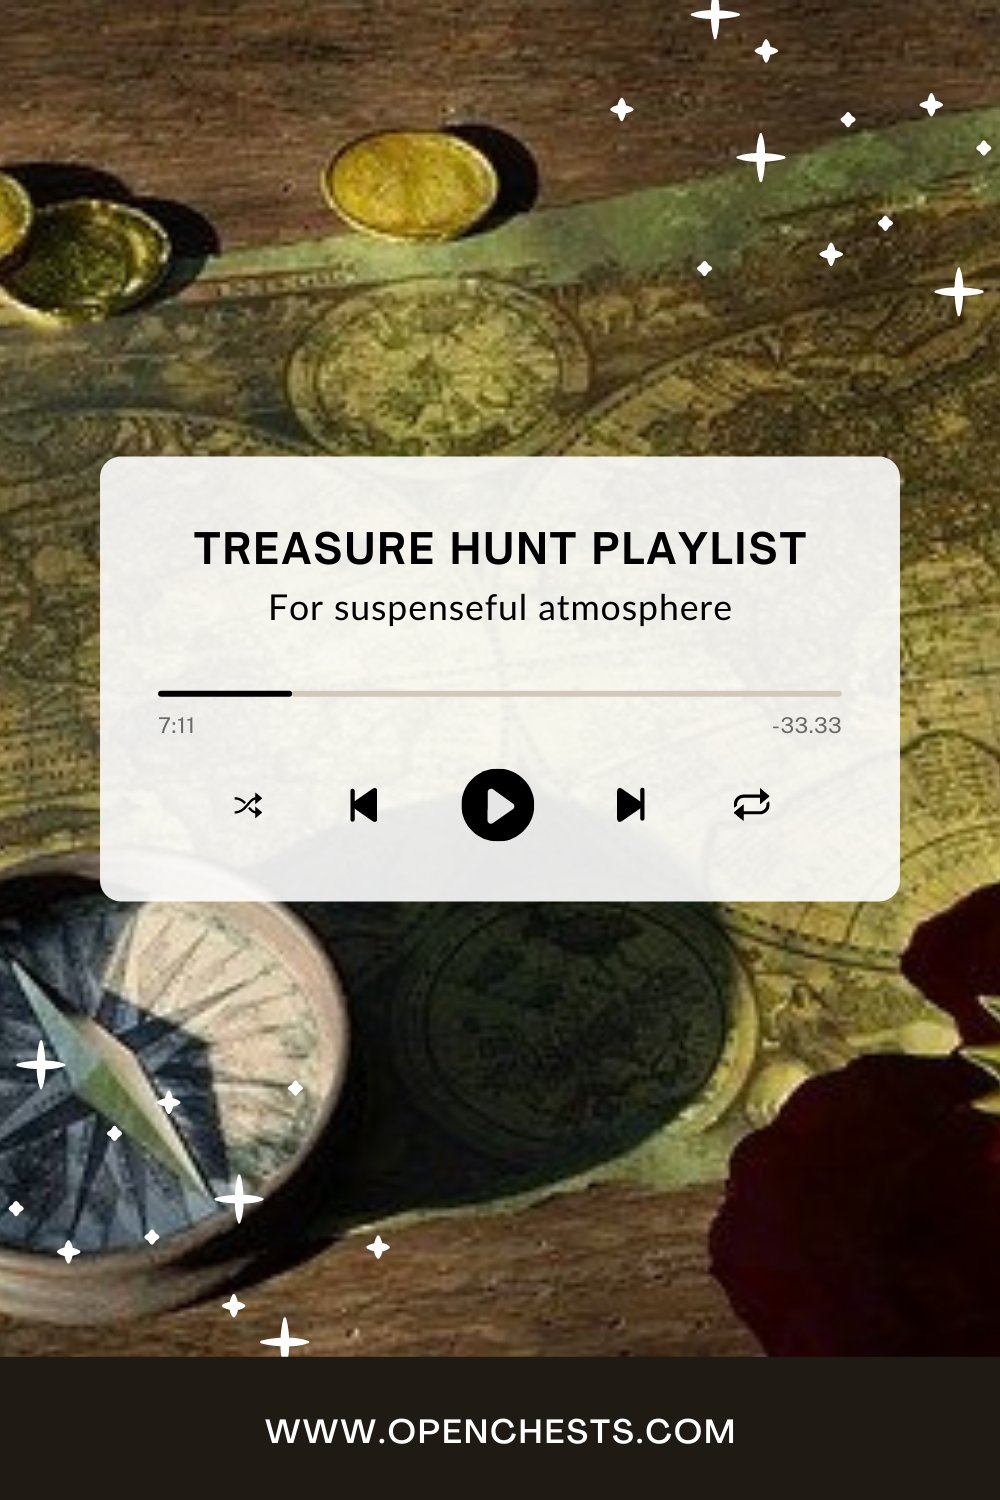 Treasure Hunt Party Music Playlist - Open Chests